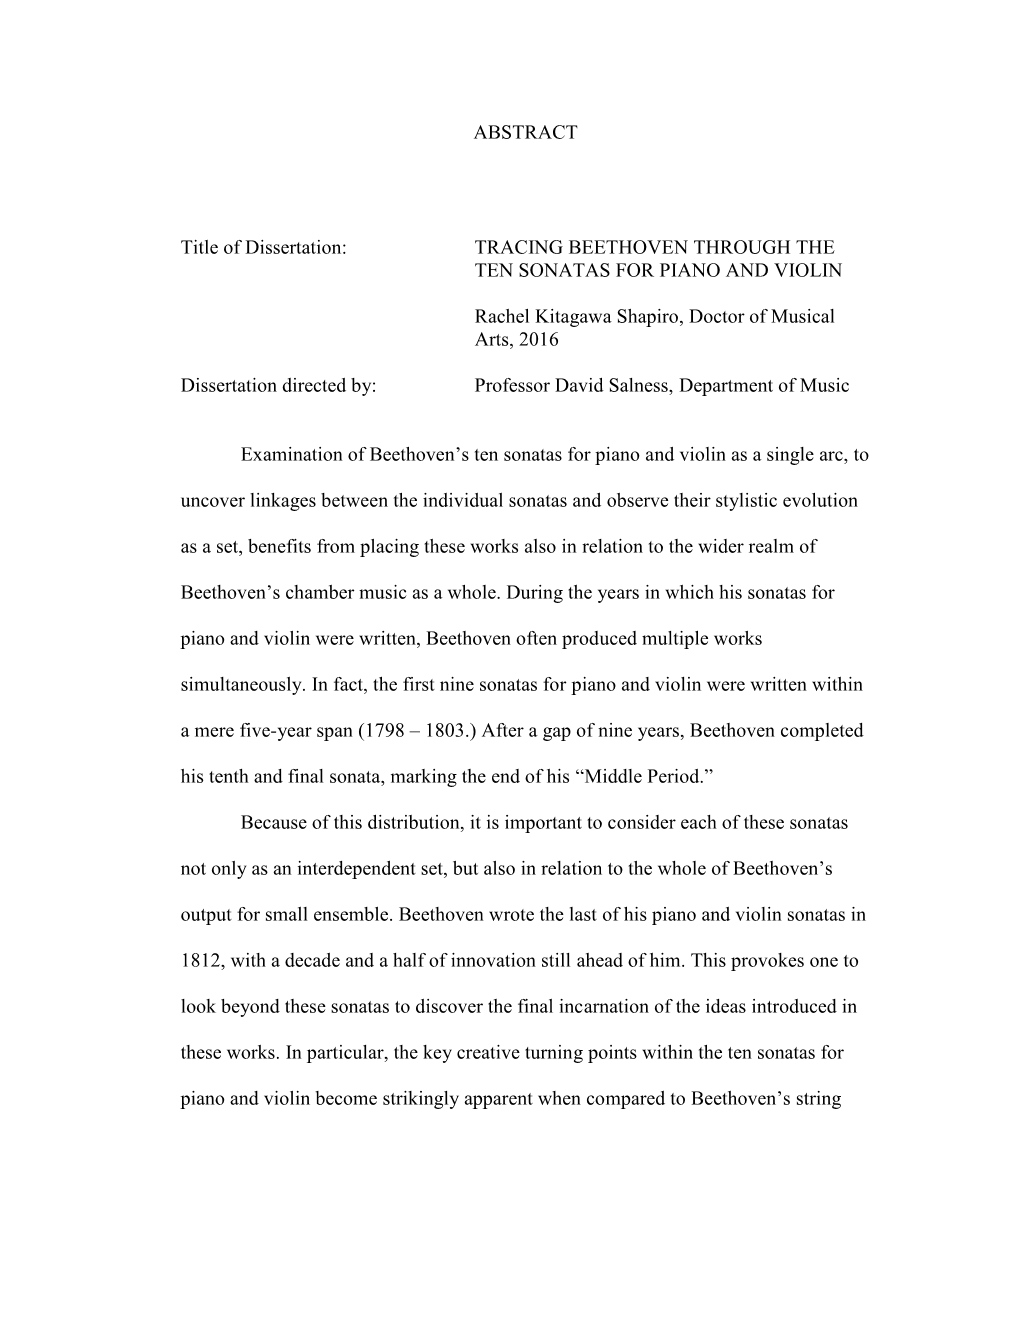 ABSTRACT Title of Dissertation: TRACING BEETHOVEN THROUGH